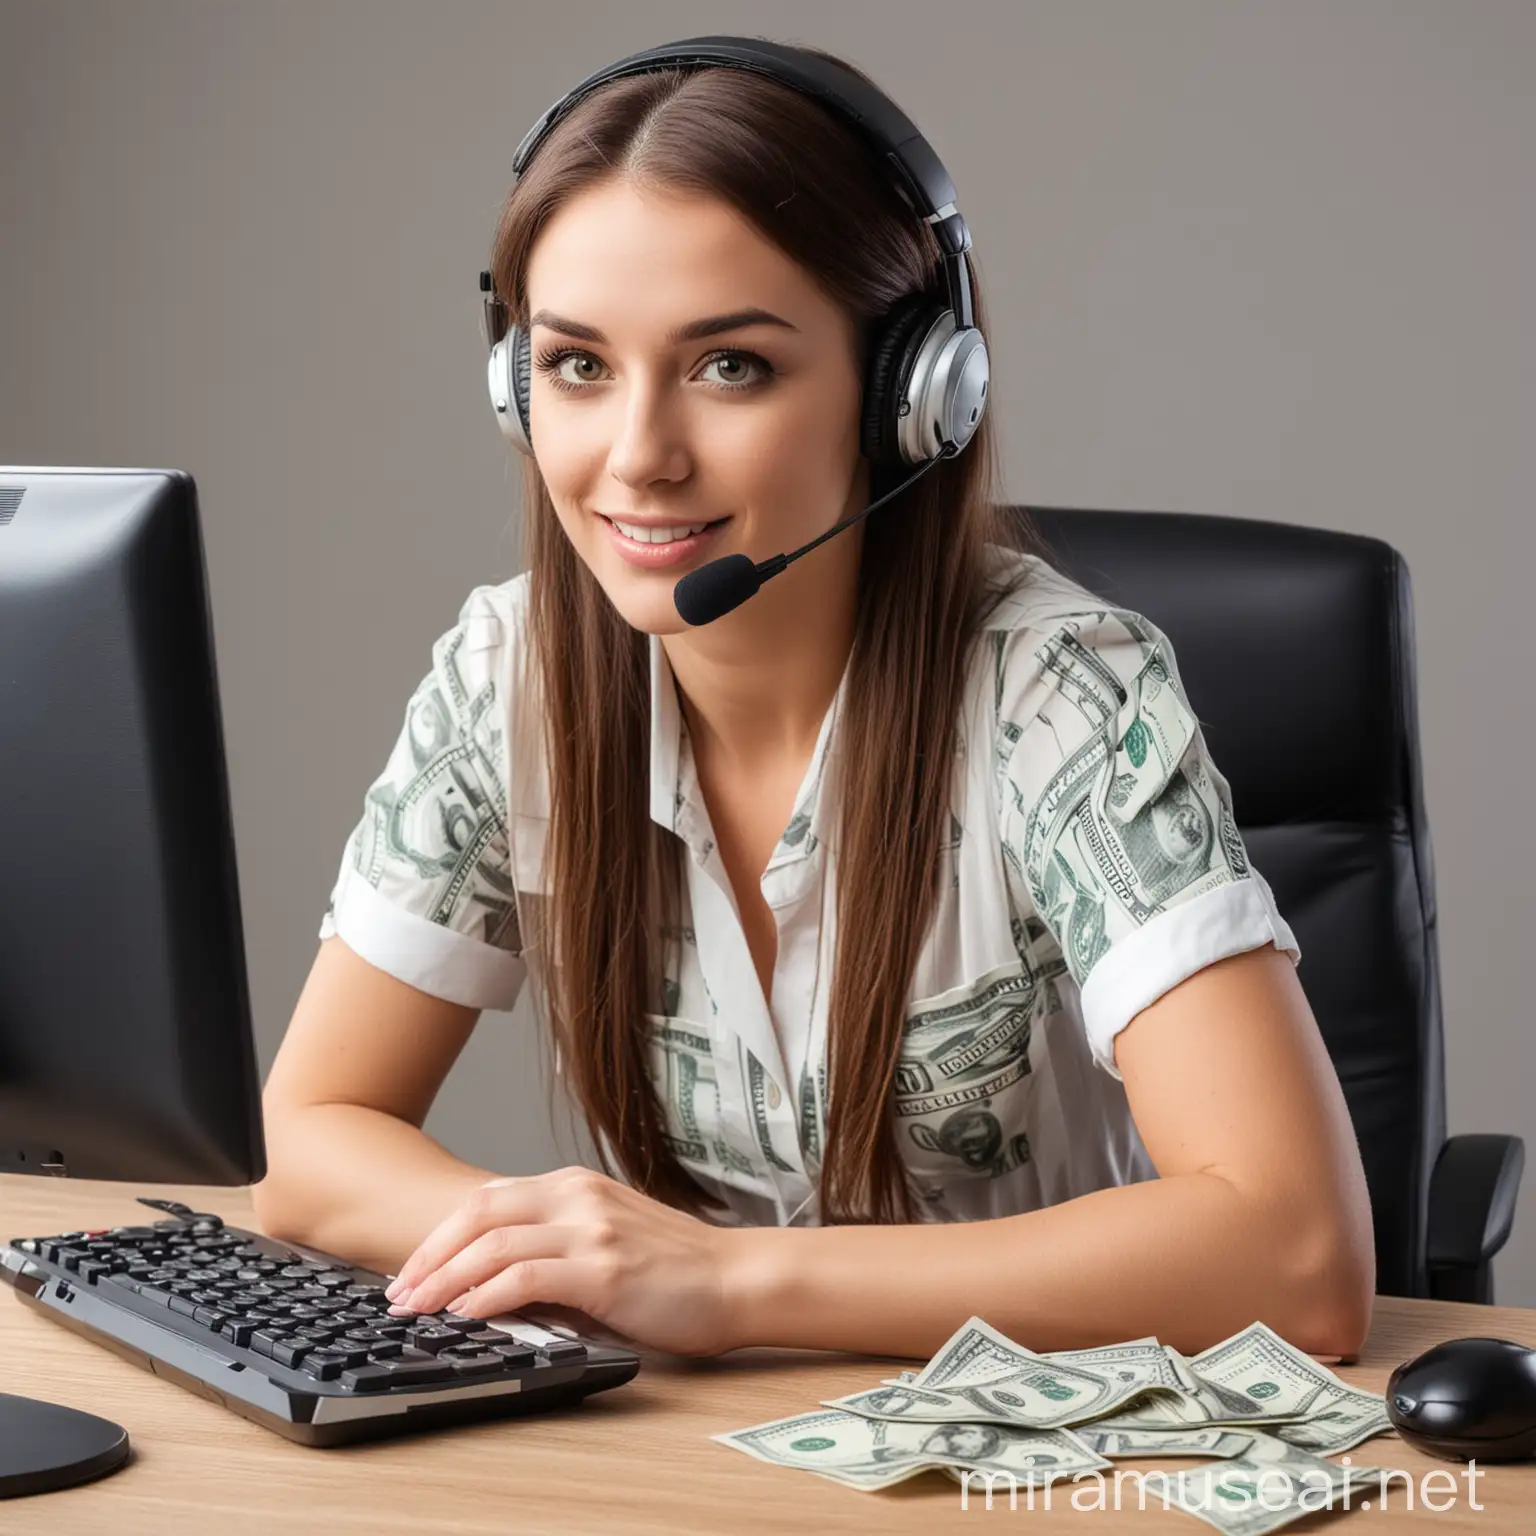 Female Video Chat Operator Holding Dollars